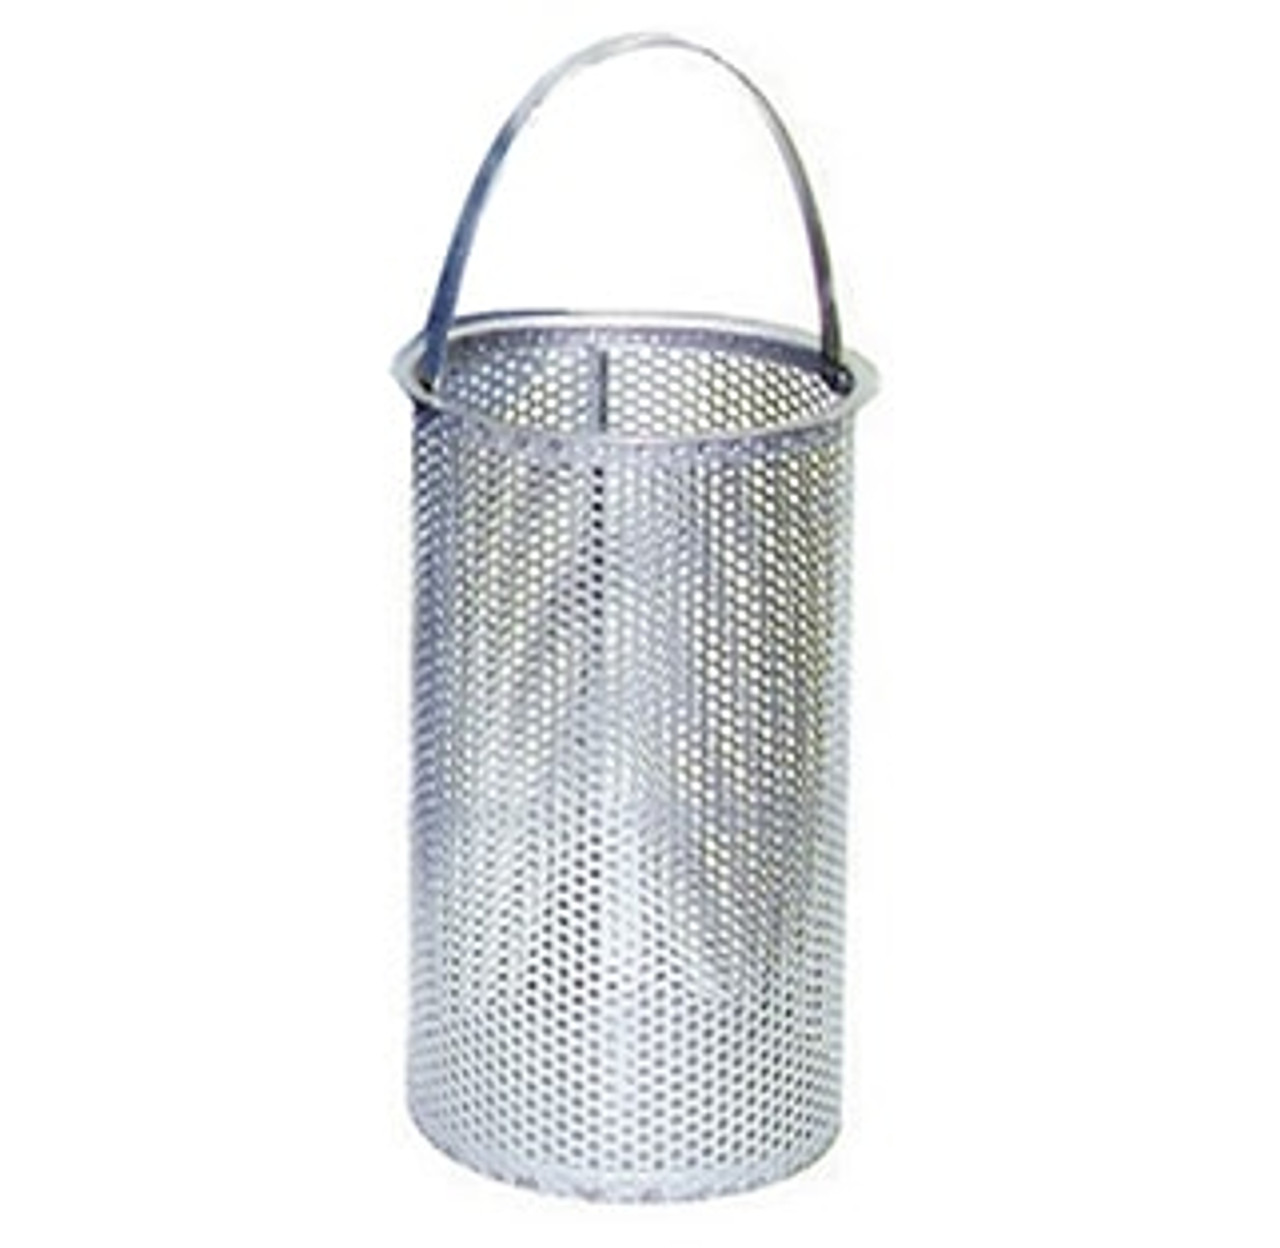 5/32" Perforated Replacement Basket for 1.25"-1.5" Eaton Model 53BTX Strainer